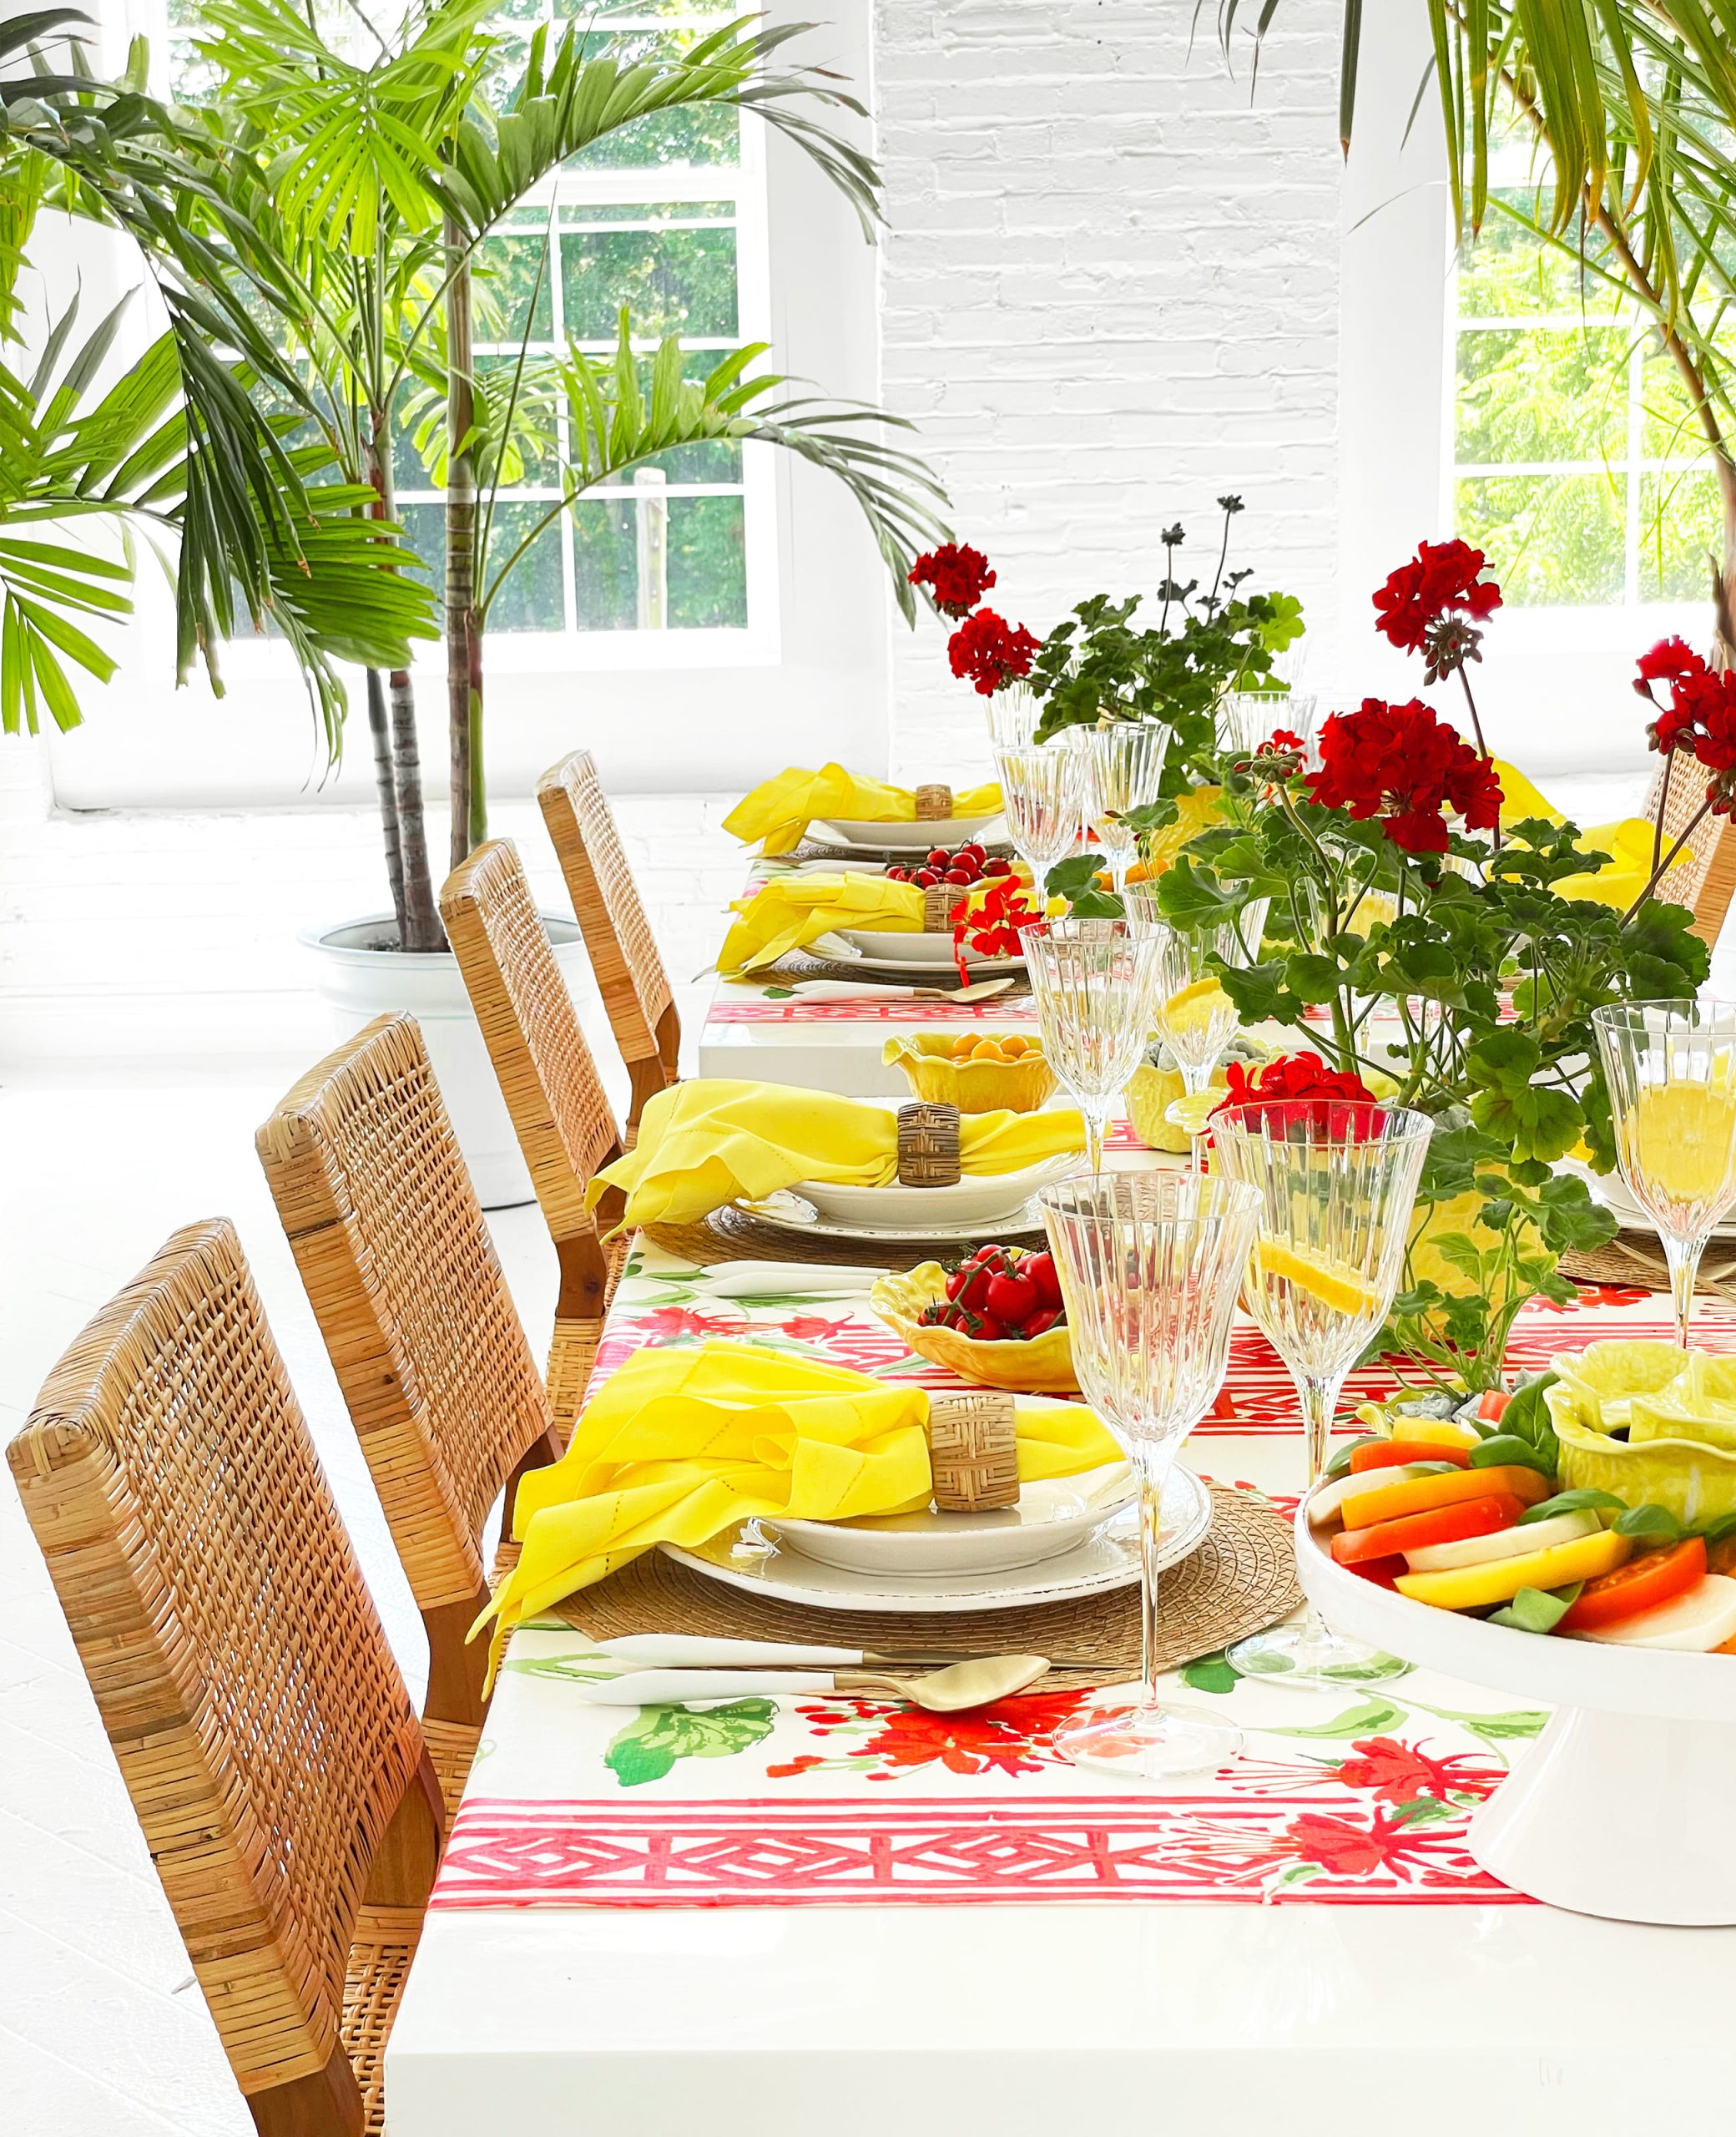 Table setting with yellow tableware and red geraniums inspired by Positano, Italy